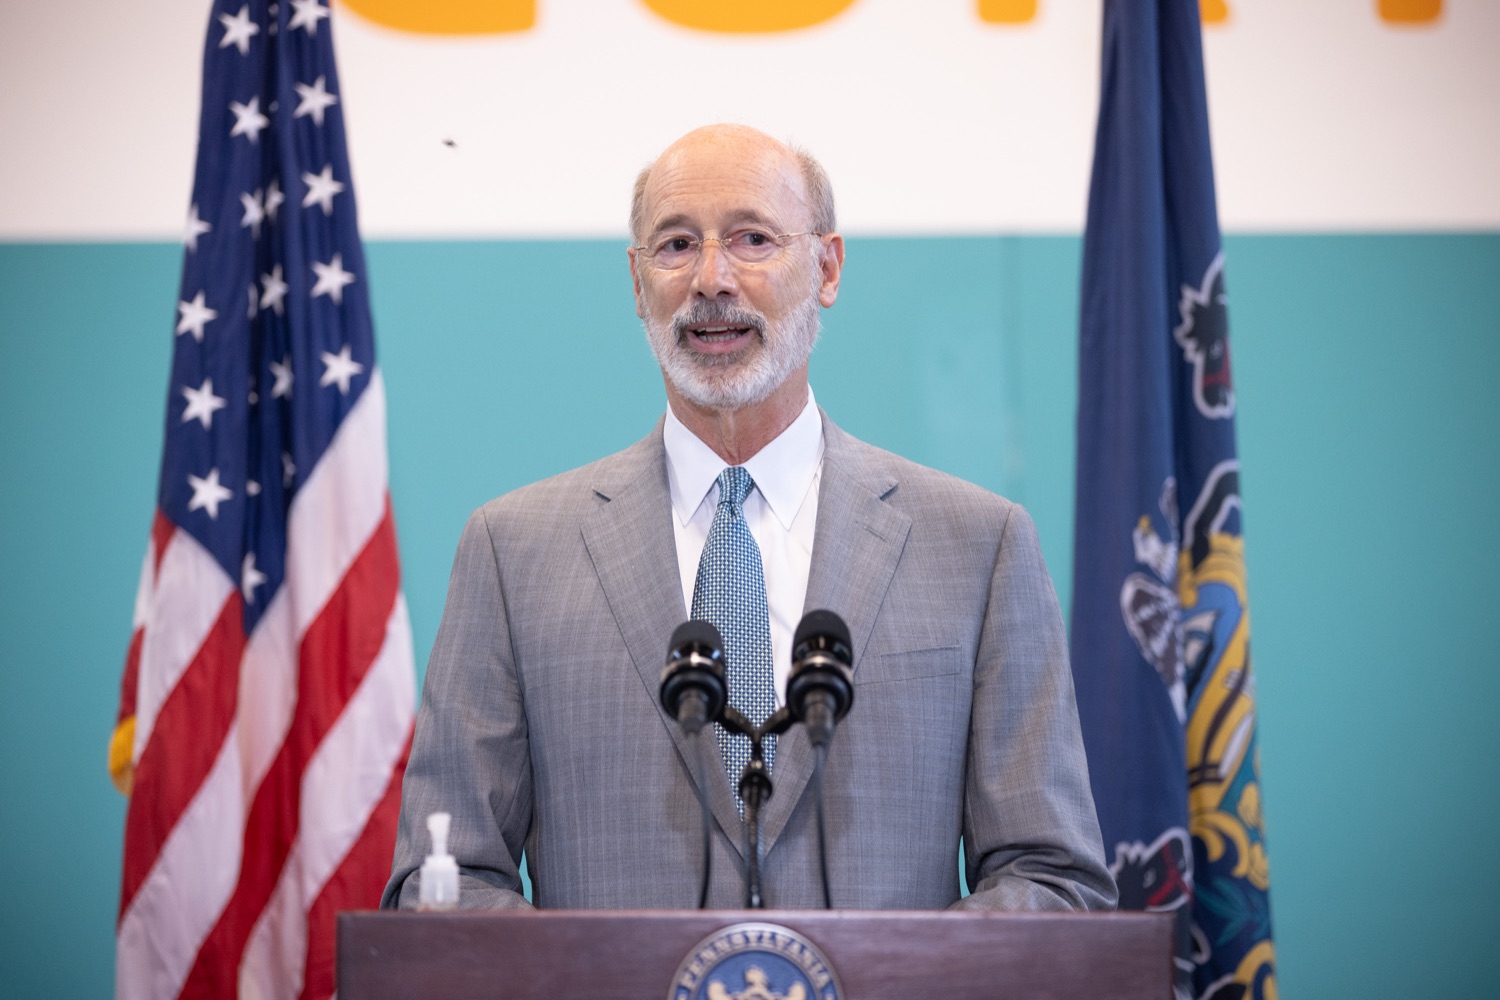 Pennsylvania Governor Tom Wolf speaking with the press.  With some politicians spreading lies about our elections to divide us, Governor Tom Wolf today vowed to protect the freedom to vote and oppose legislation that would create barriers to voting and silence the voices of some Pennsylvanians. These are the same lies that led directly to the appalling assault on our U.S. Capitol and our democracy on January 6, and now, just a few short months later, the same people who fomented, encouraged, and joined that mob are again emerging to undermine the fabric of our nation.   Harrisburg, PA  June 9, 2021<br><a href="https://filesource.amperwave.net/commonwealthofpa/photo/18815_gov_voterRights_dz_013.jpg" target="_blank">⇣ Download Photo</a>